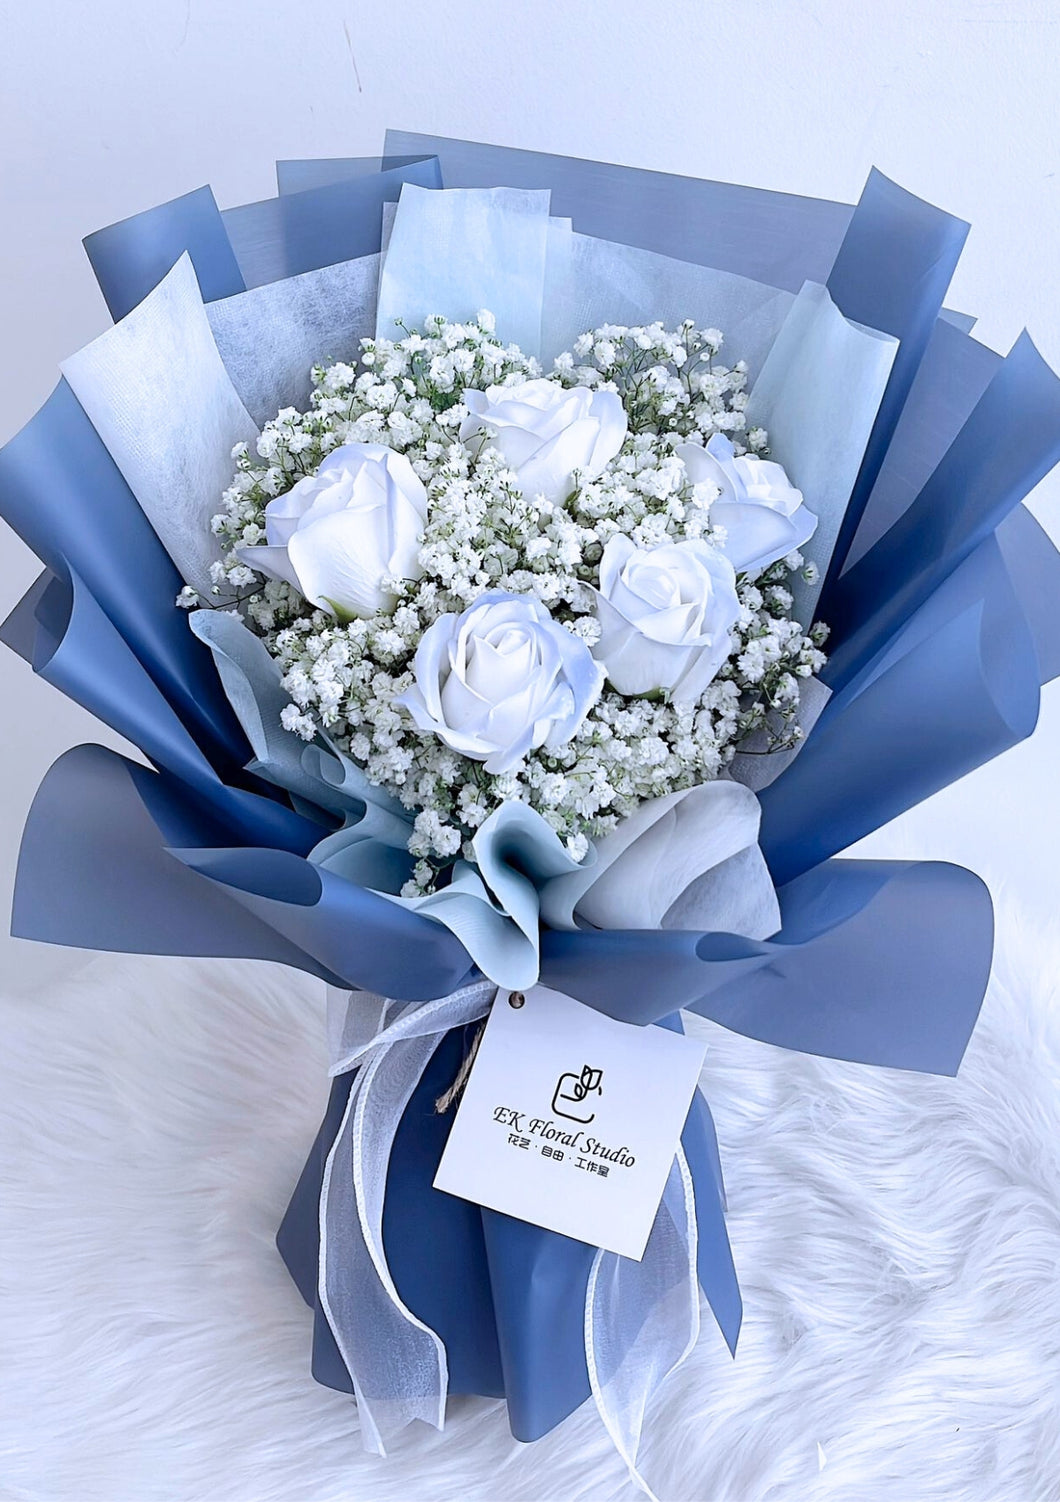 5 Ice Blue Soap Rose with White Baby Breath Bouquet 5朵香冰蓝香皂玫瑰白色满天星花束